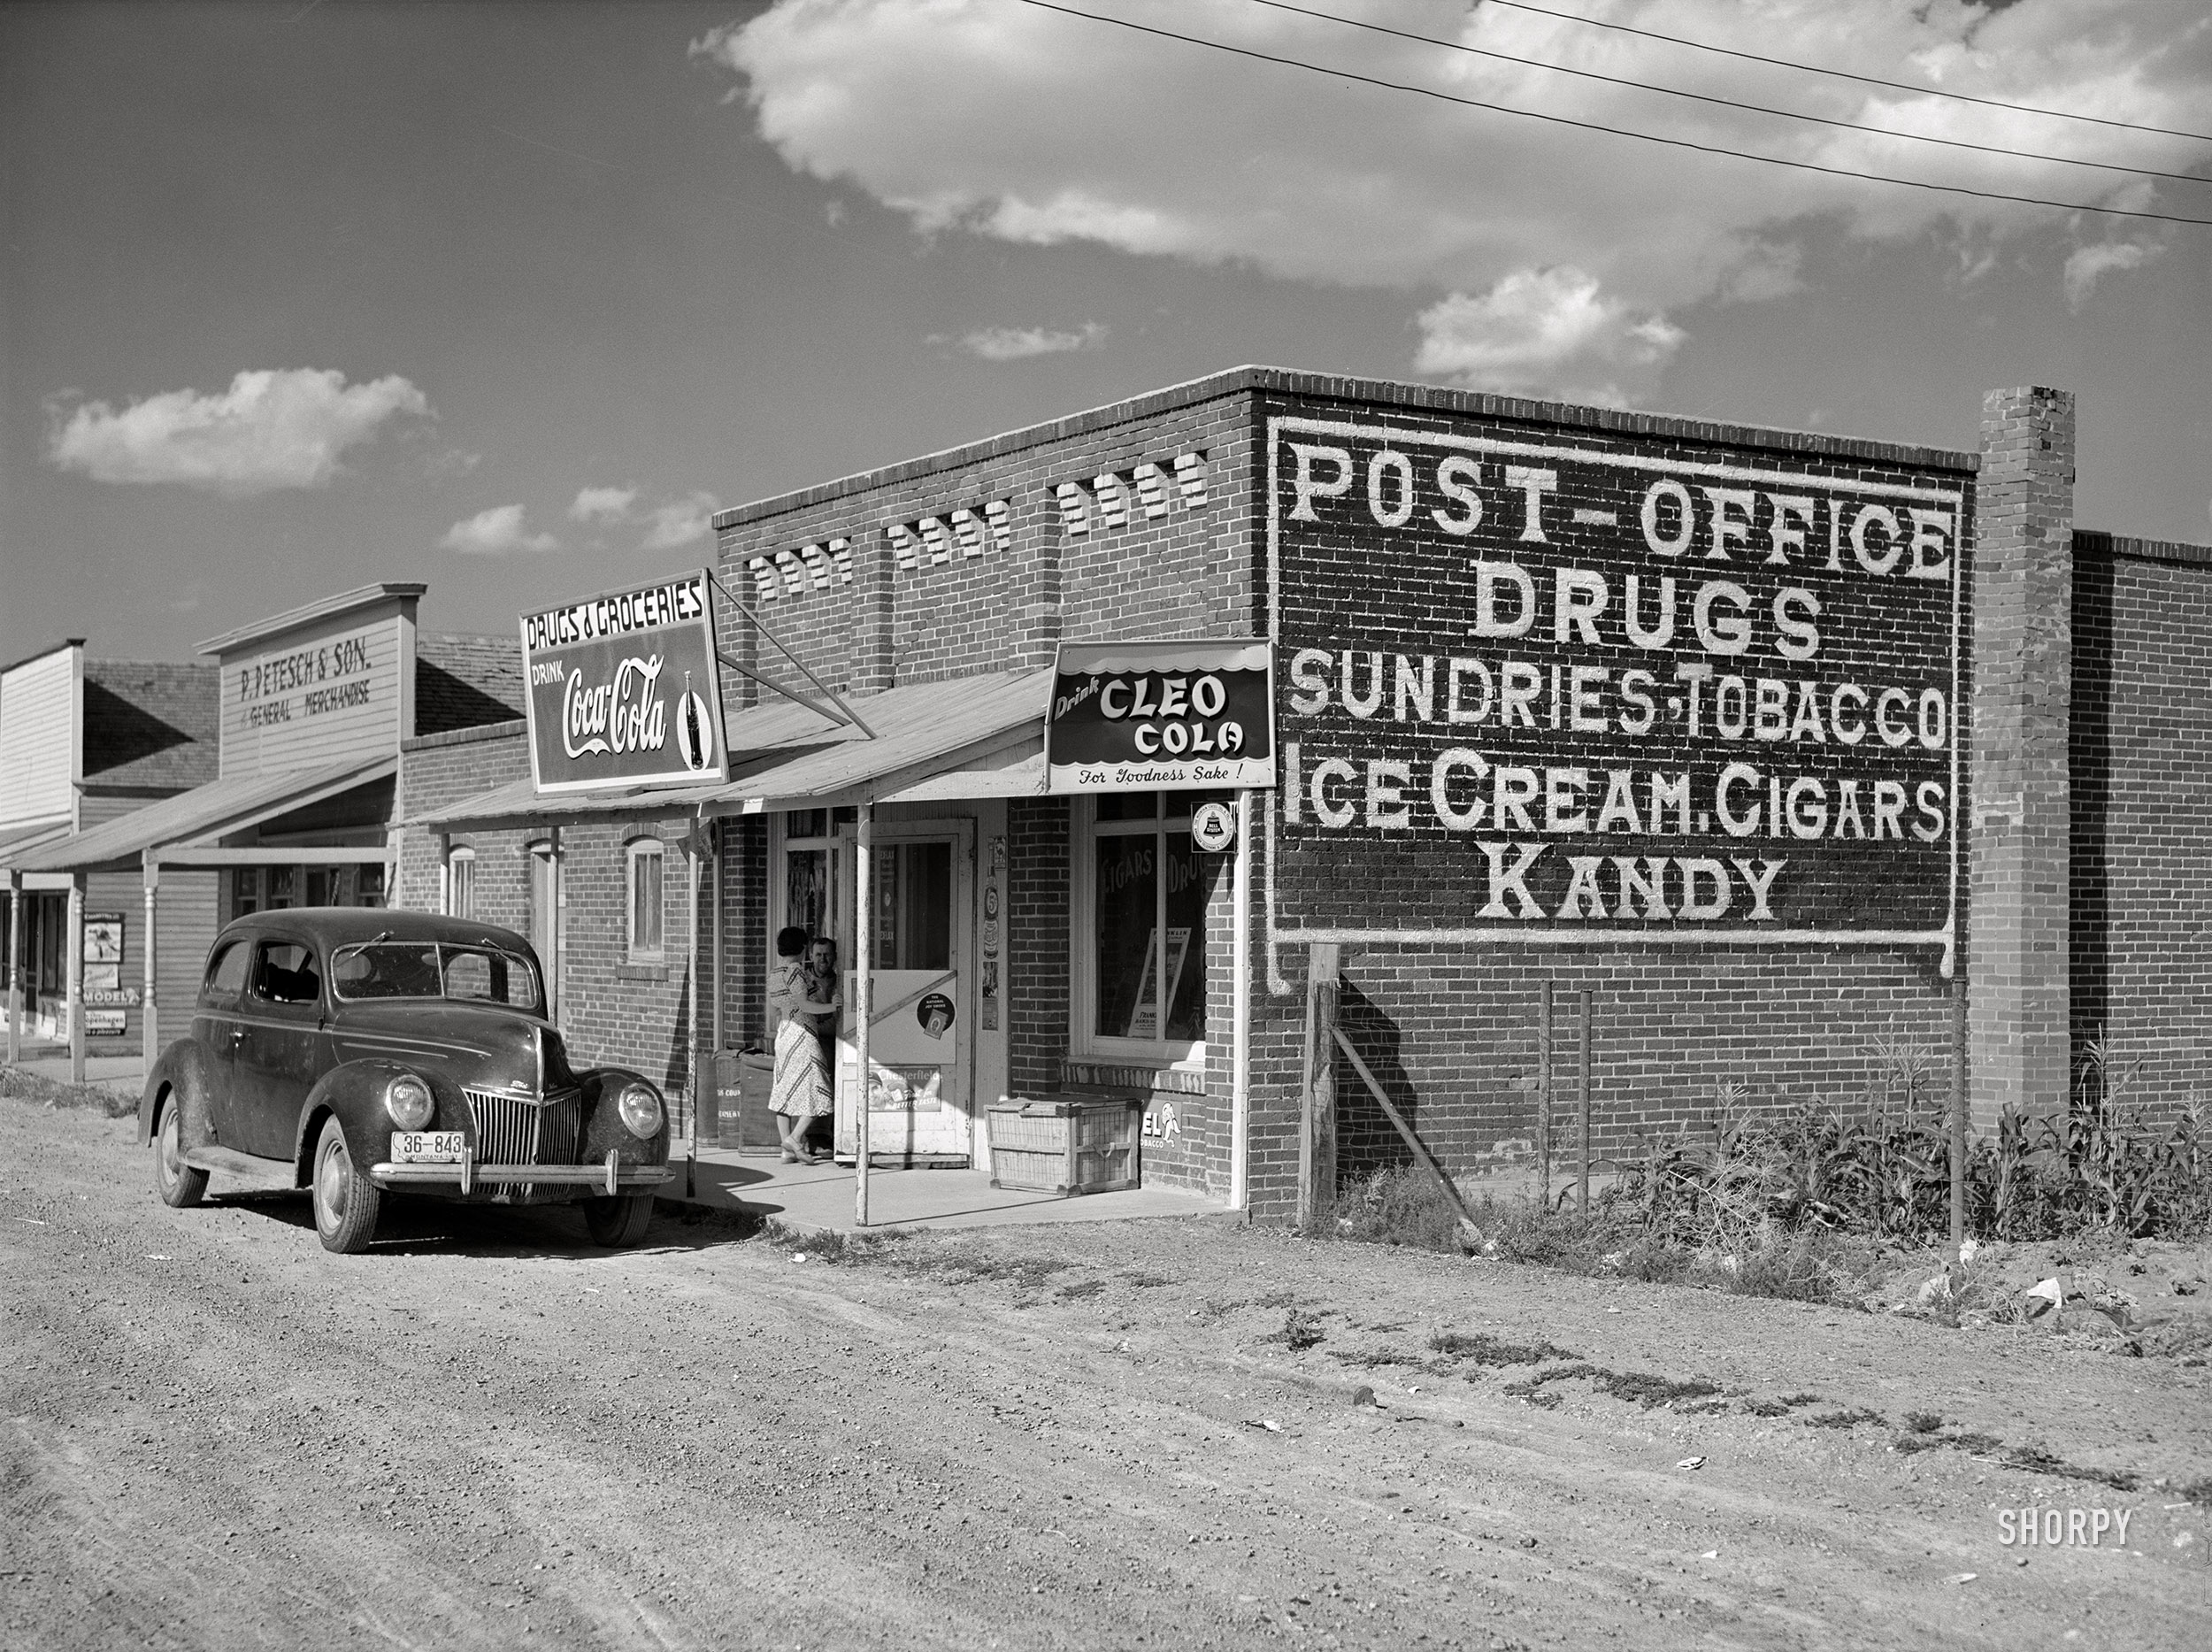 September 1941. "Buildings on main street of ghost town. Judith Basin County, Montana." Another look at the hamlet of Geyser, which seems to have an affinity for "Kandy." Acetate negative by Marion Post Wolcott for the Farm Security Administration. View full size.